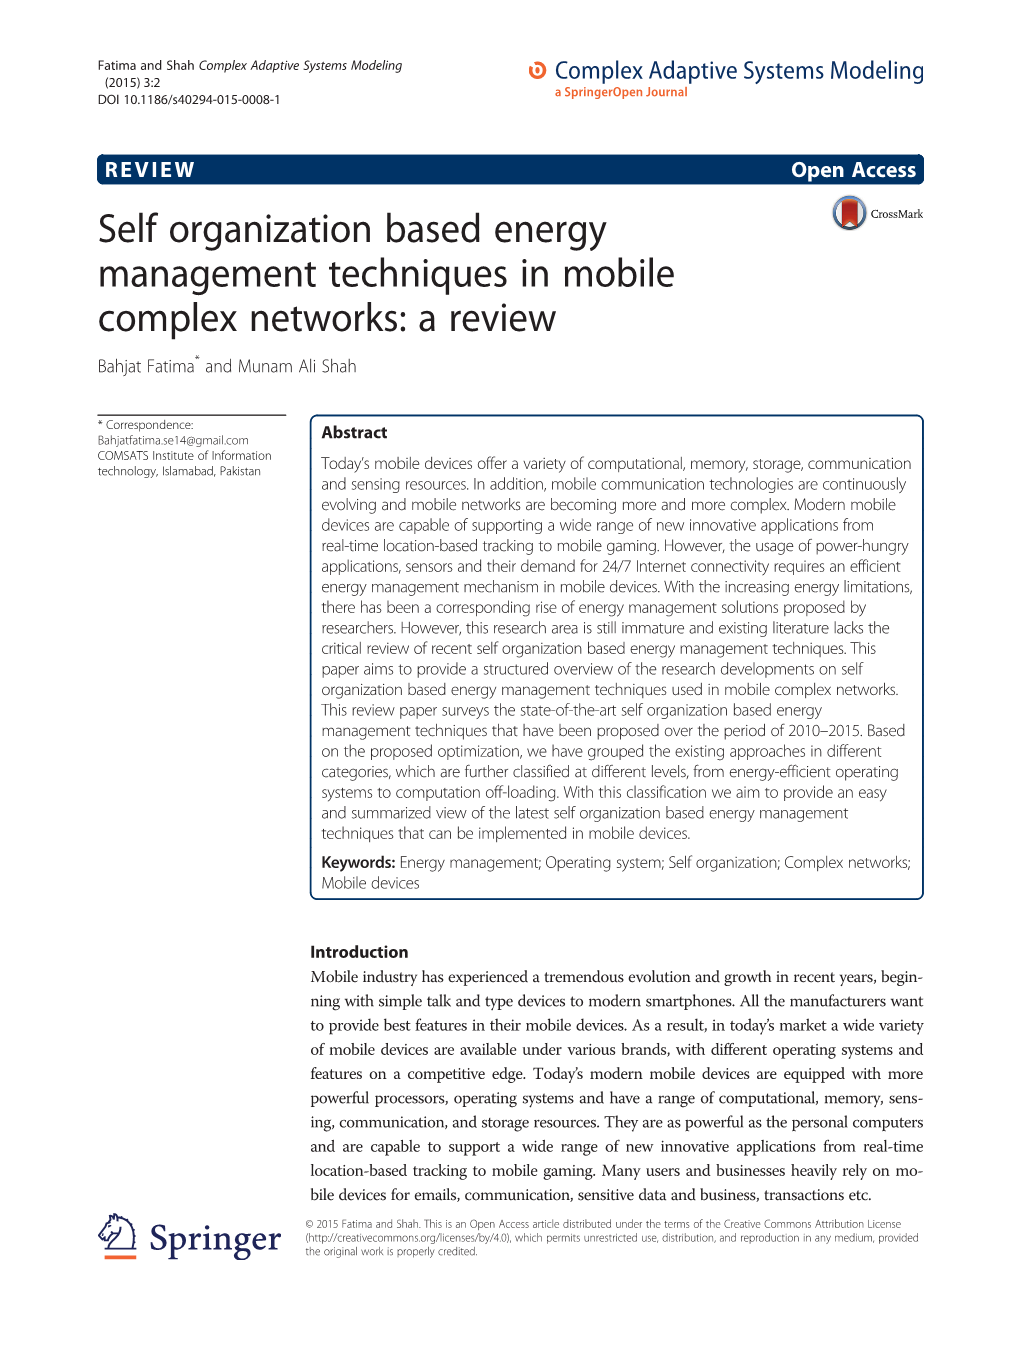 Self Organization Based Energy Management Techniques in Mobile Complex Networks: a Review Bahjat Fatima* and Munam Ali Shah